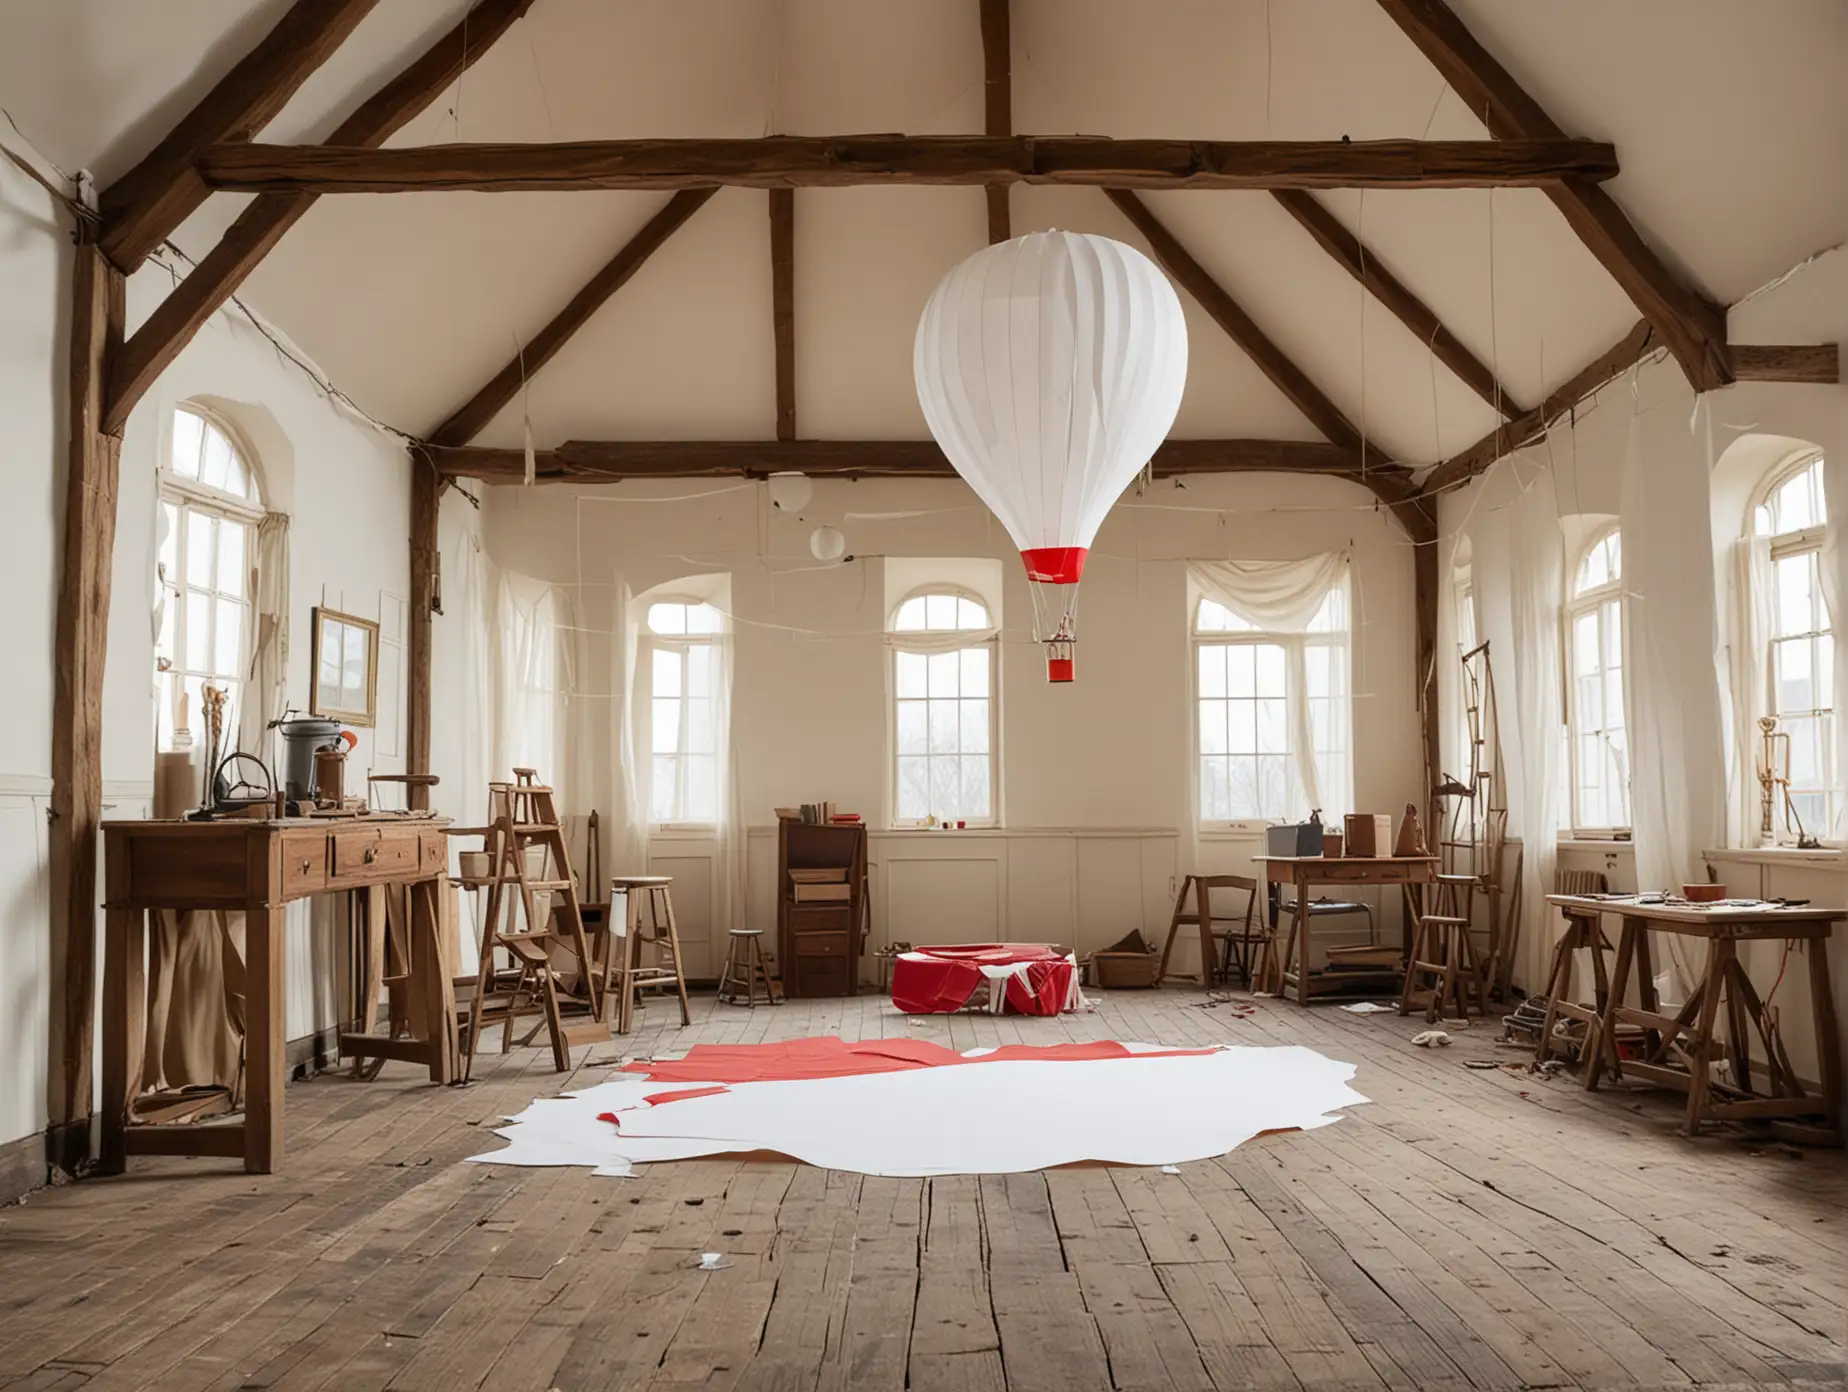 18th-Century-Workshop-Interior-Red-and-White-Paper-Hot-Air-Balloon-Construction